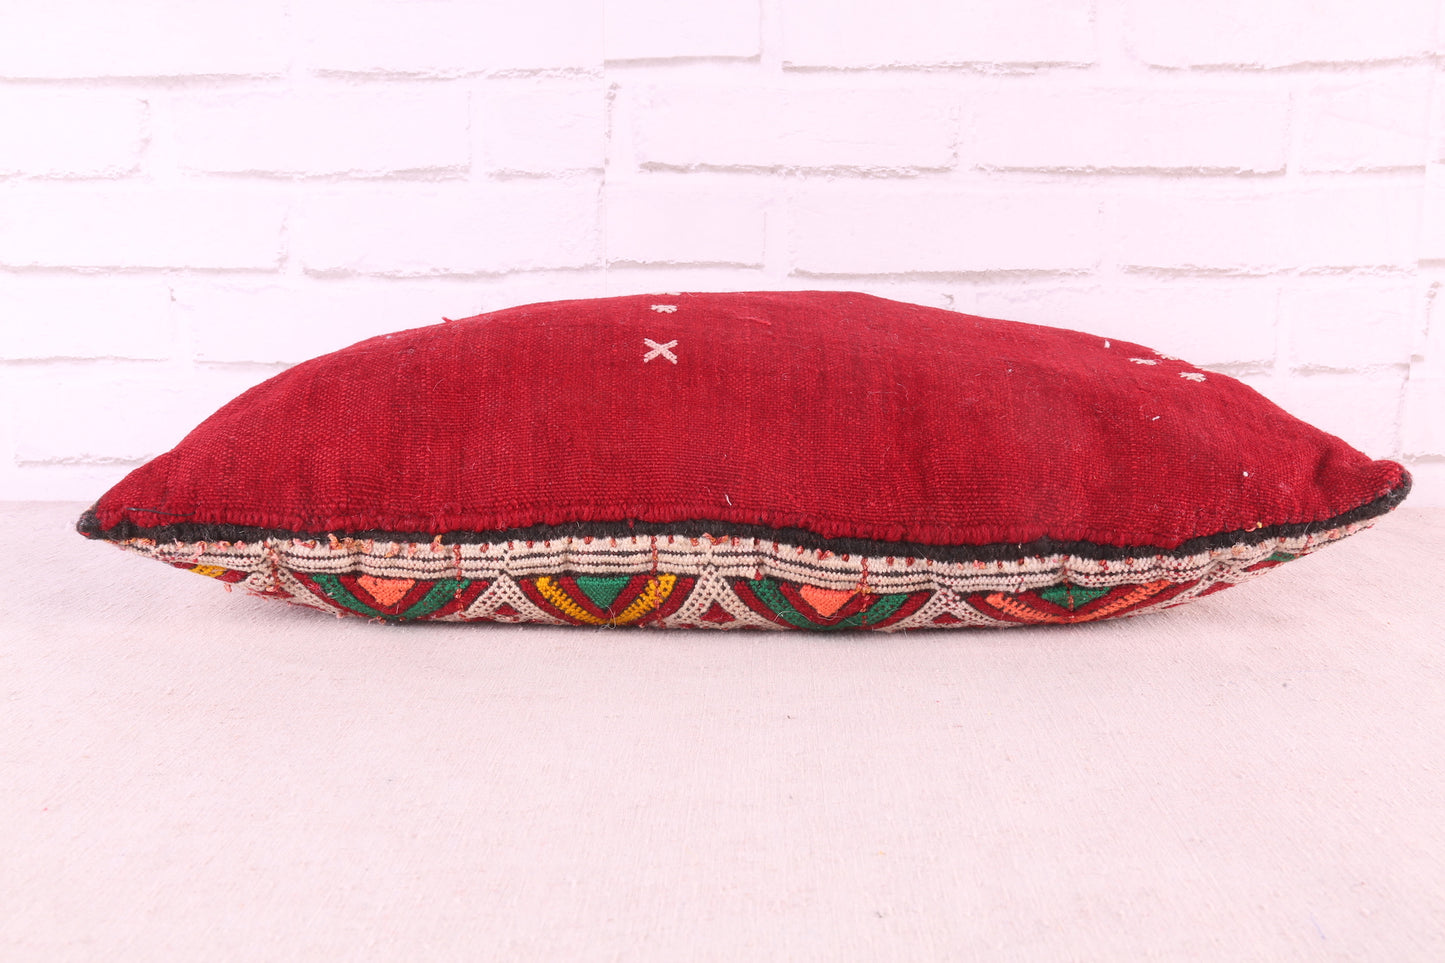 Berber vintage pillow 15.3 inches X 23.6 inches